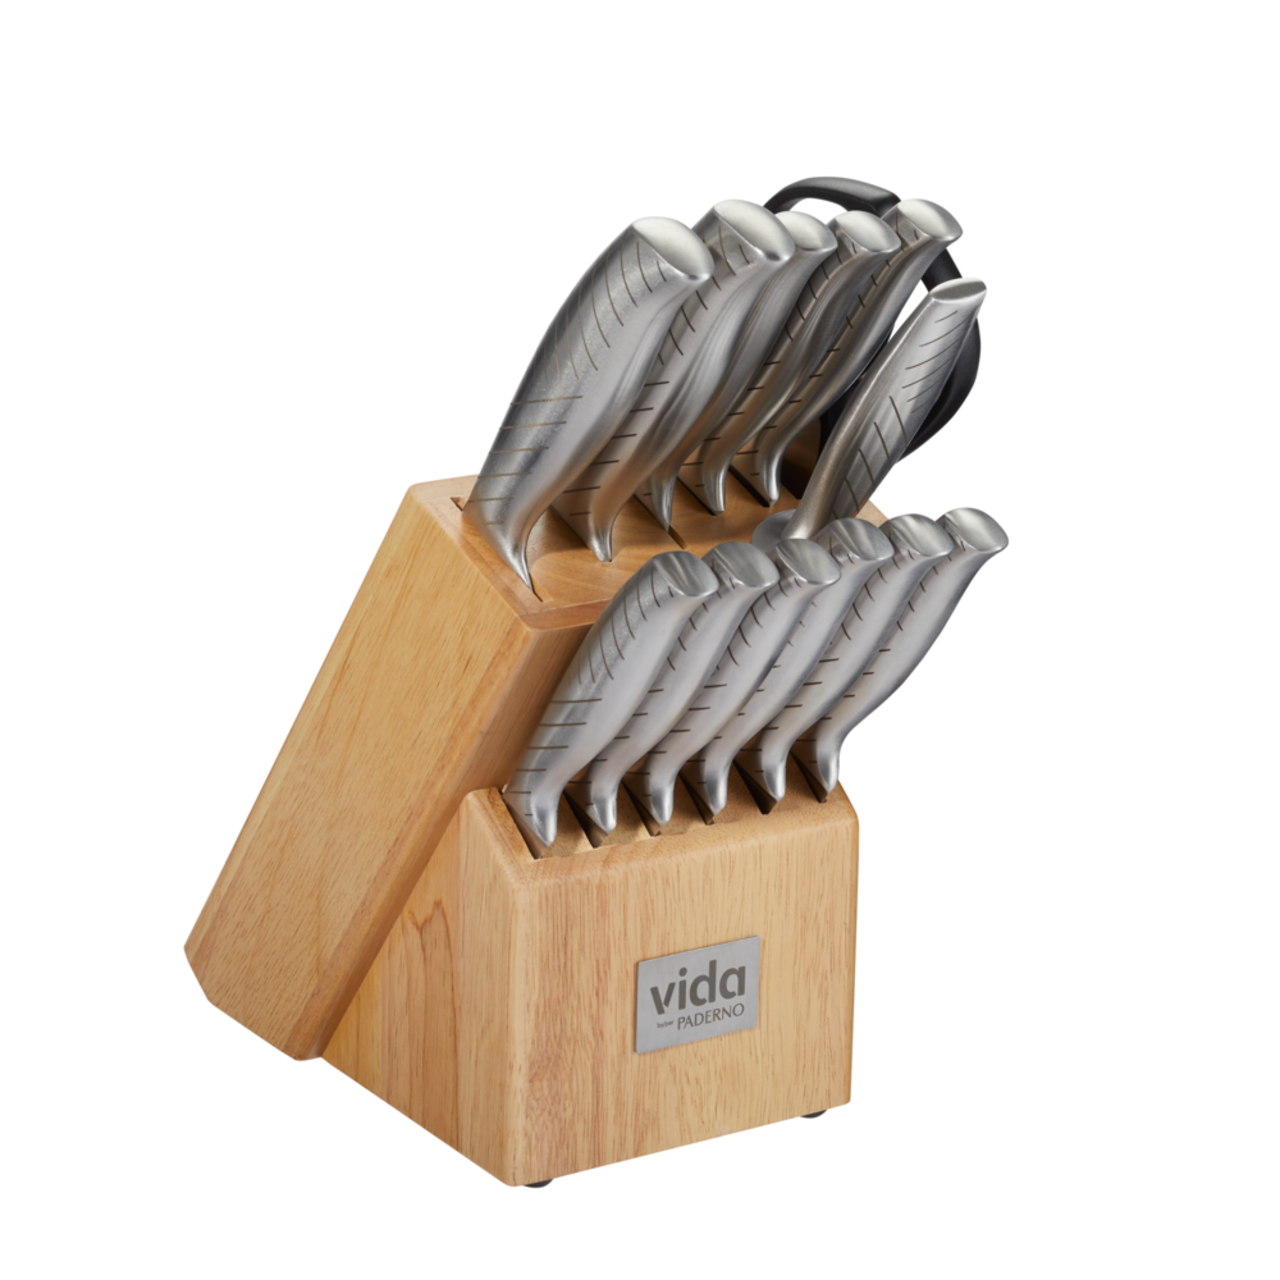 https://media-www.canadiantire.ca/product/living/kitchen/cutlery/1429566/vida-14-pc-hallow-handle-knife-block-fd07ee56-0230-4b29-b669-a594c0f689dd.png?imdensity=1&imwidth=640&impolicy=mZoom